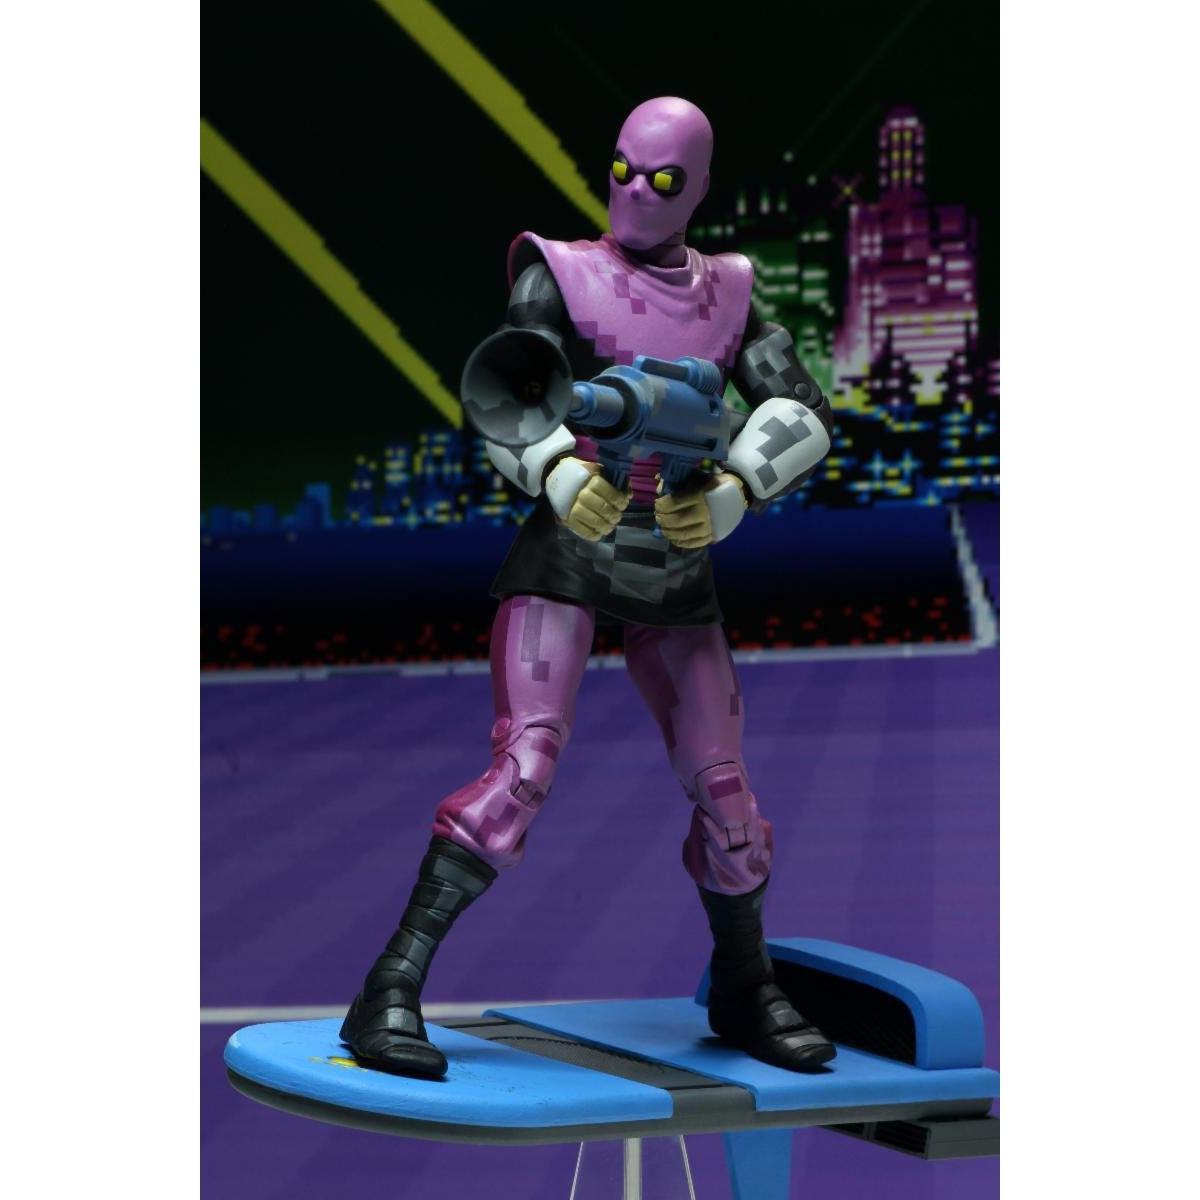 Image of TMNT: Turtles in Time - 7" Scale Action Figures - Foot Soldier - NOVEMBER 2019